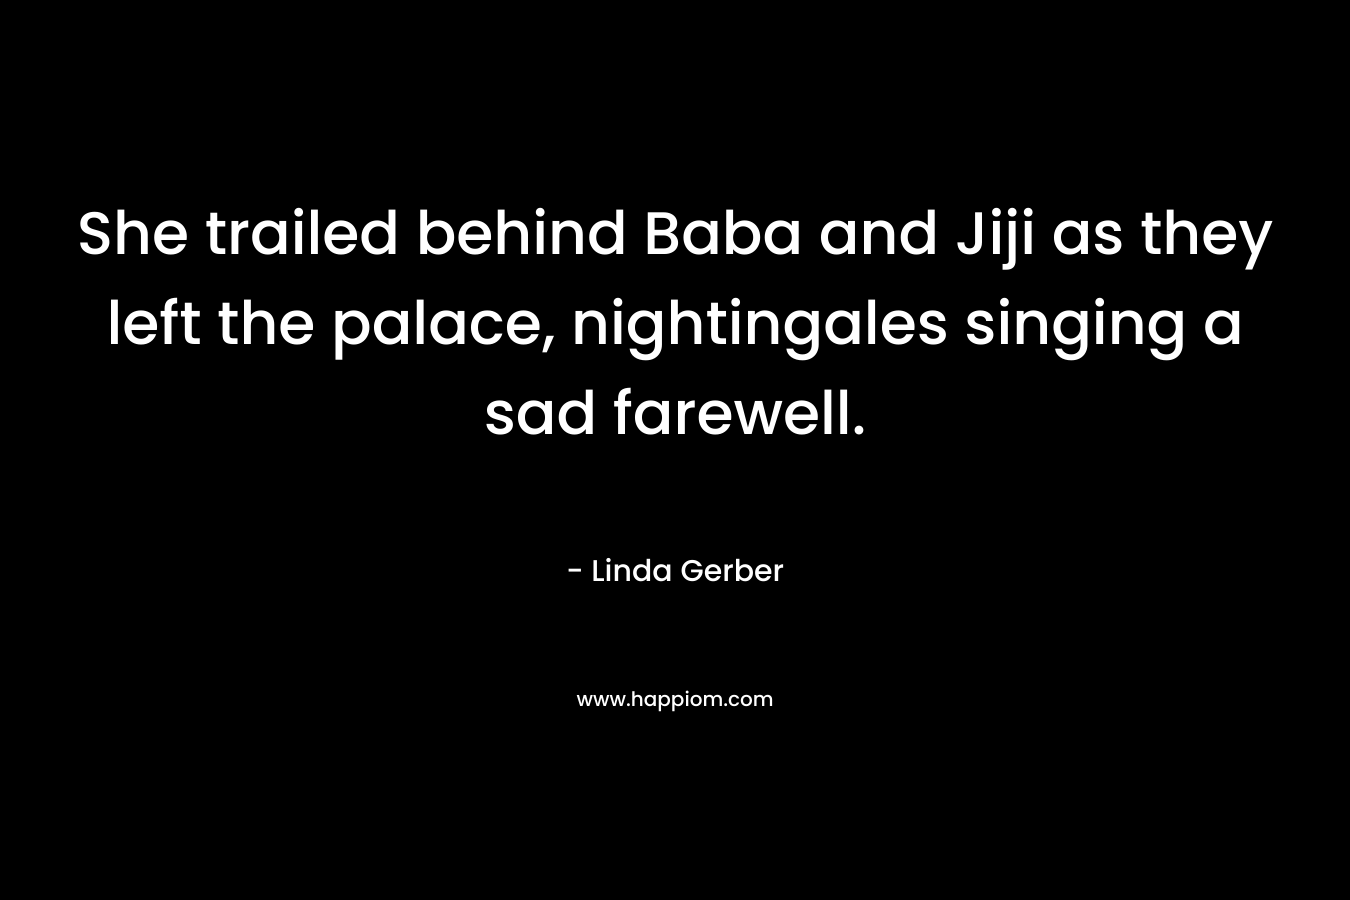 She trailed behind Baba and Jiji as they left the palace, nightingales singing a sad farewell. – Linda Gerber